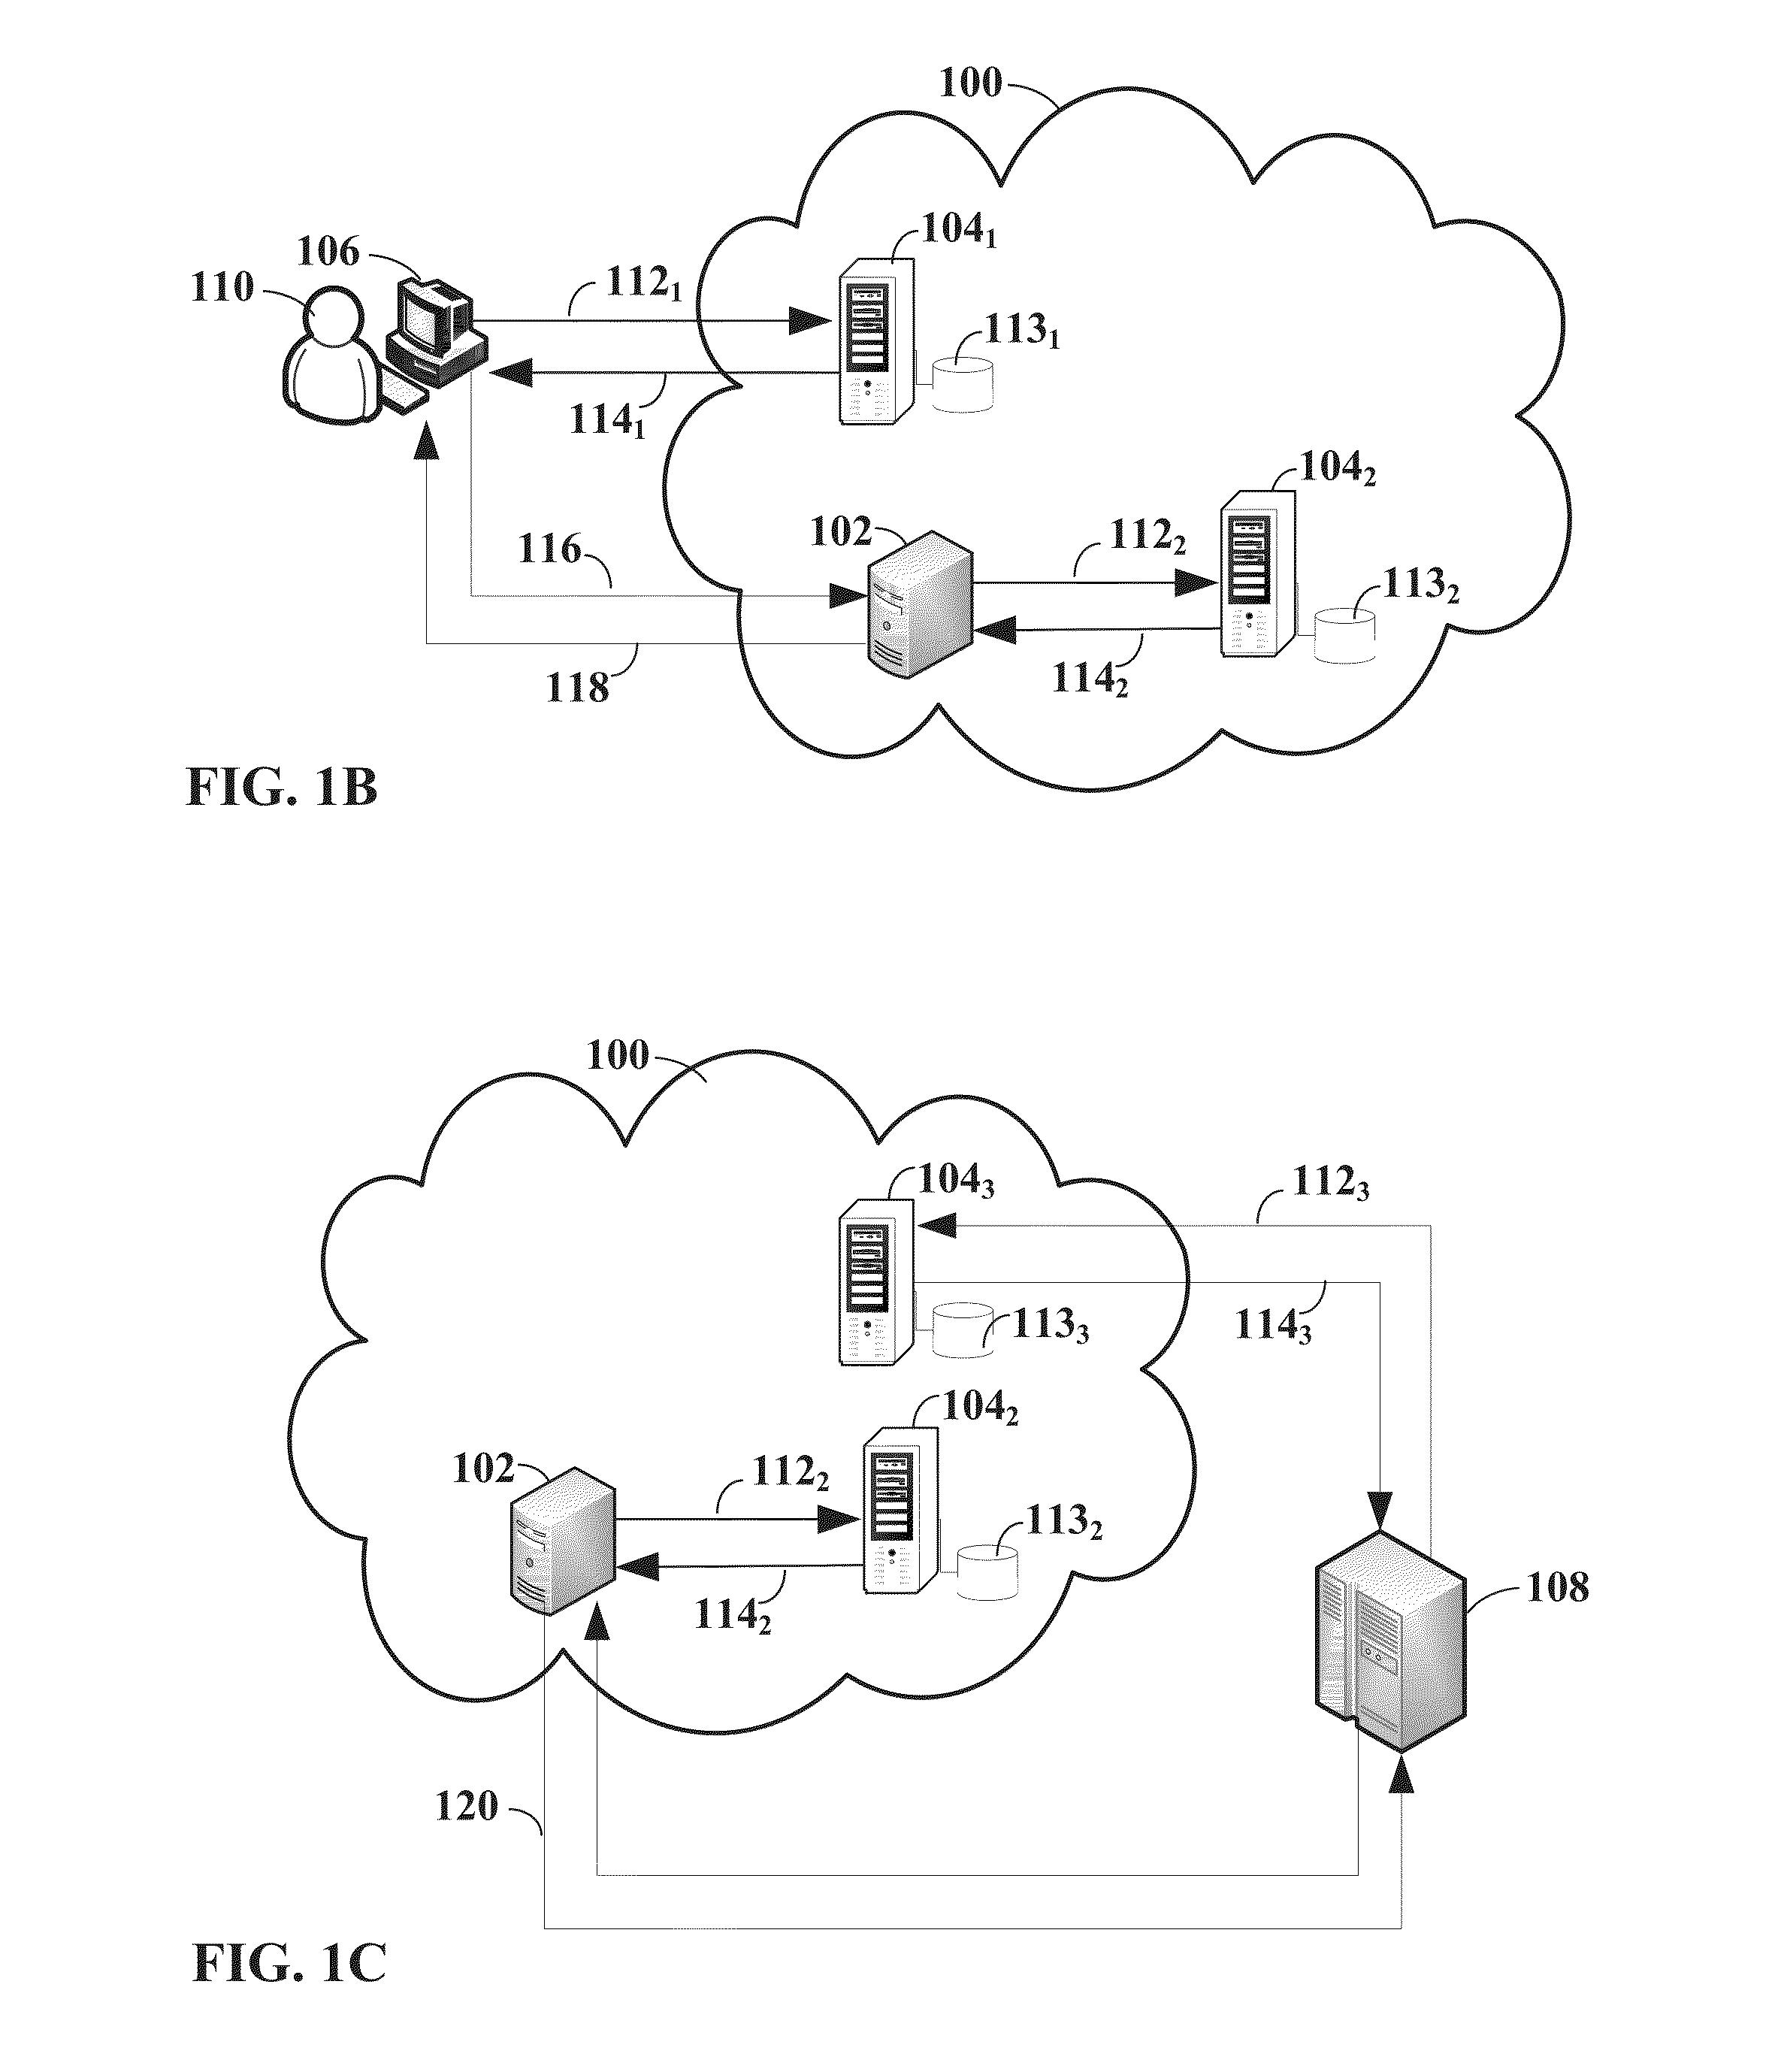 Distributed computer systems with time-dependent credentials